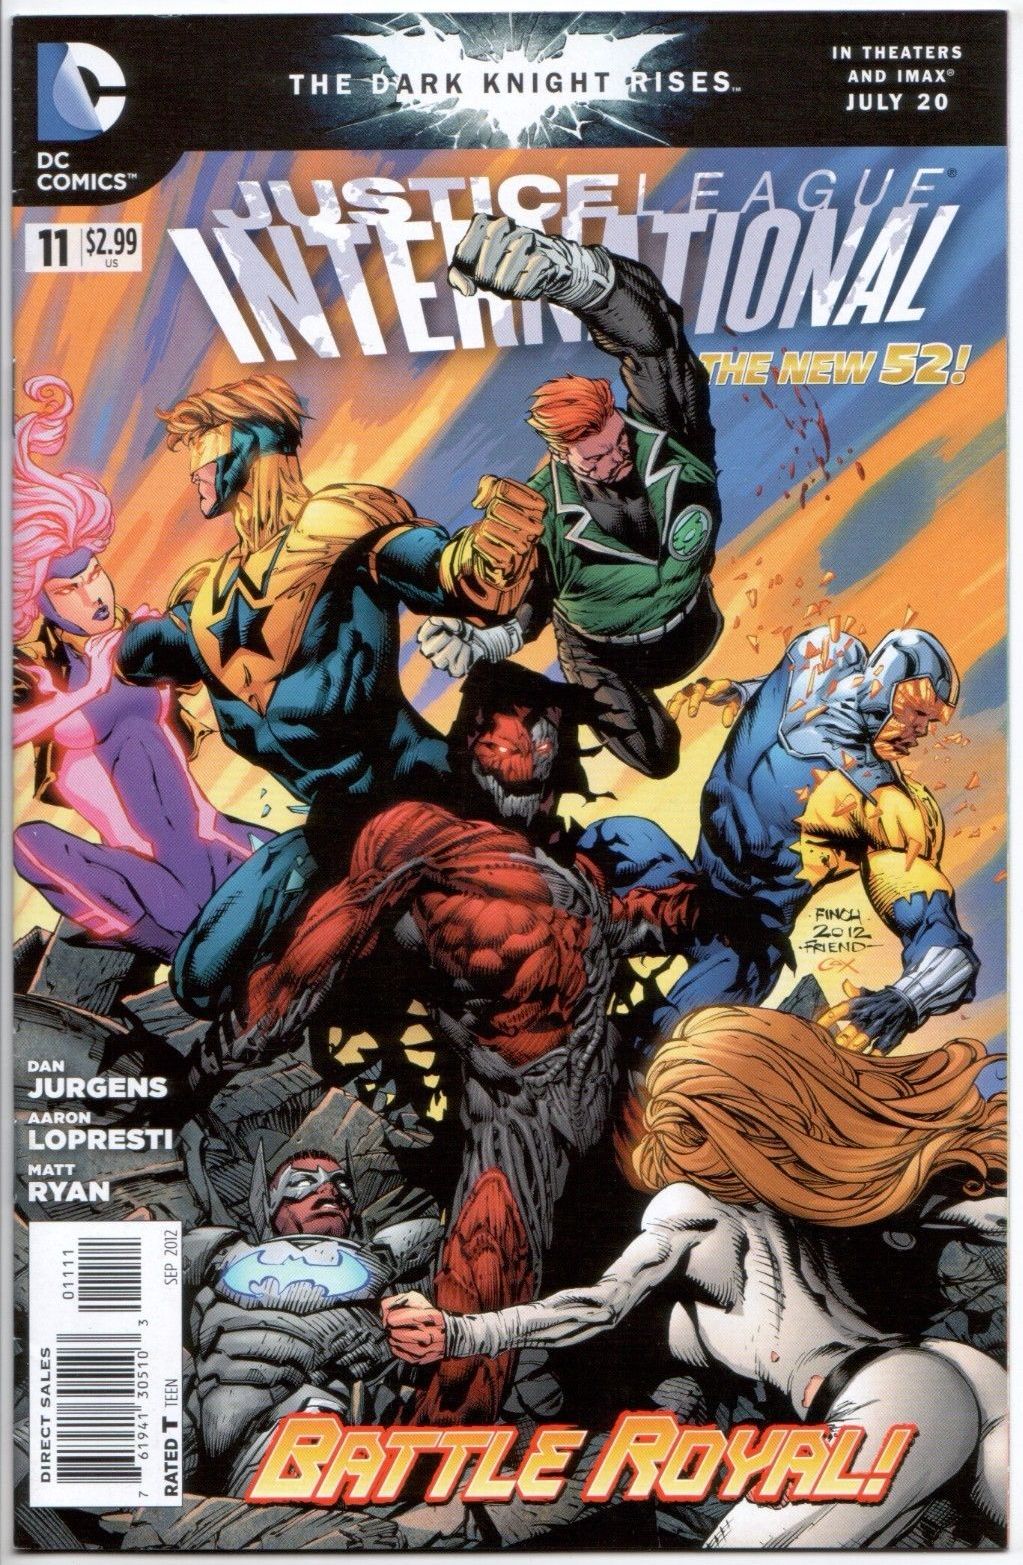 JUSTICE LEAGUE INTERNATIONAL #11 The NEW 52